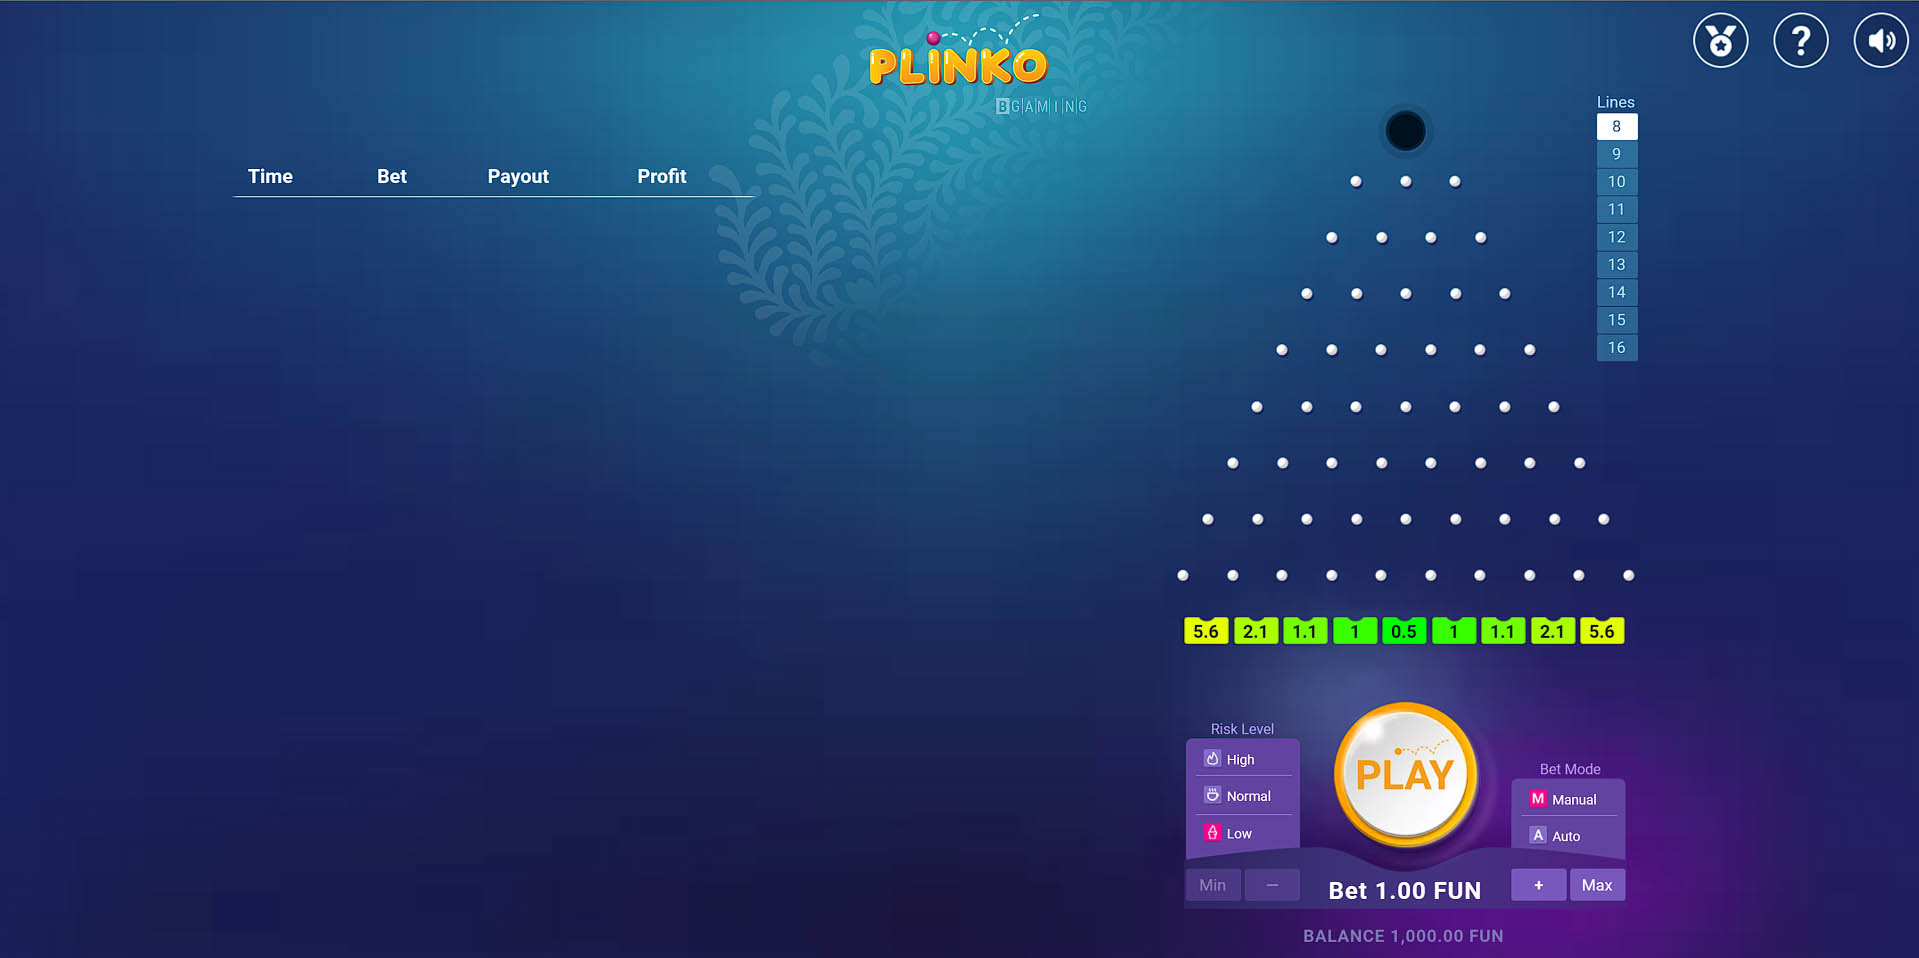 Interface and controls for Plinko